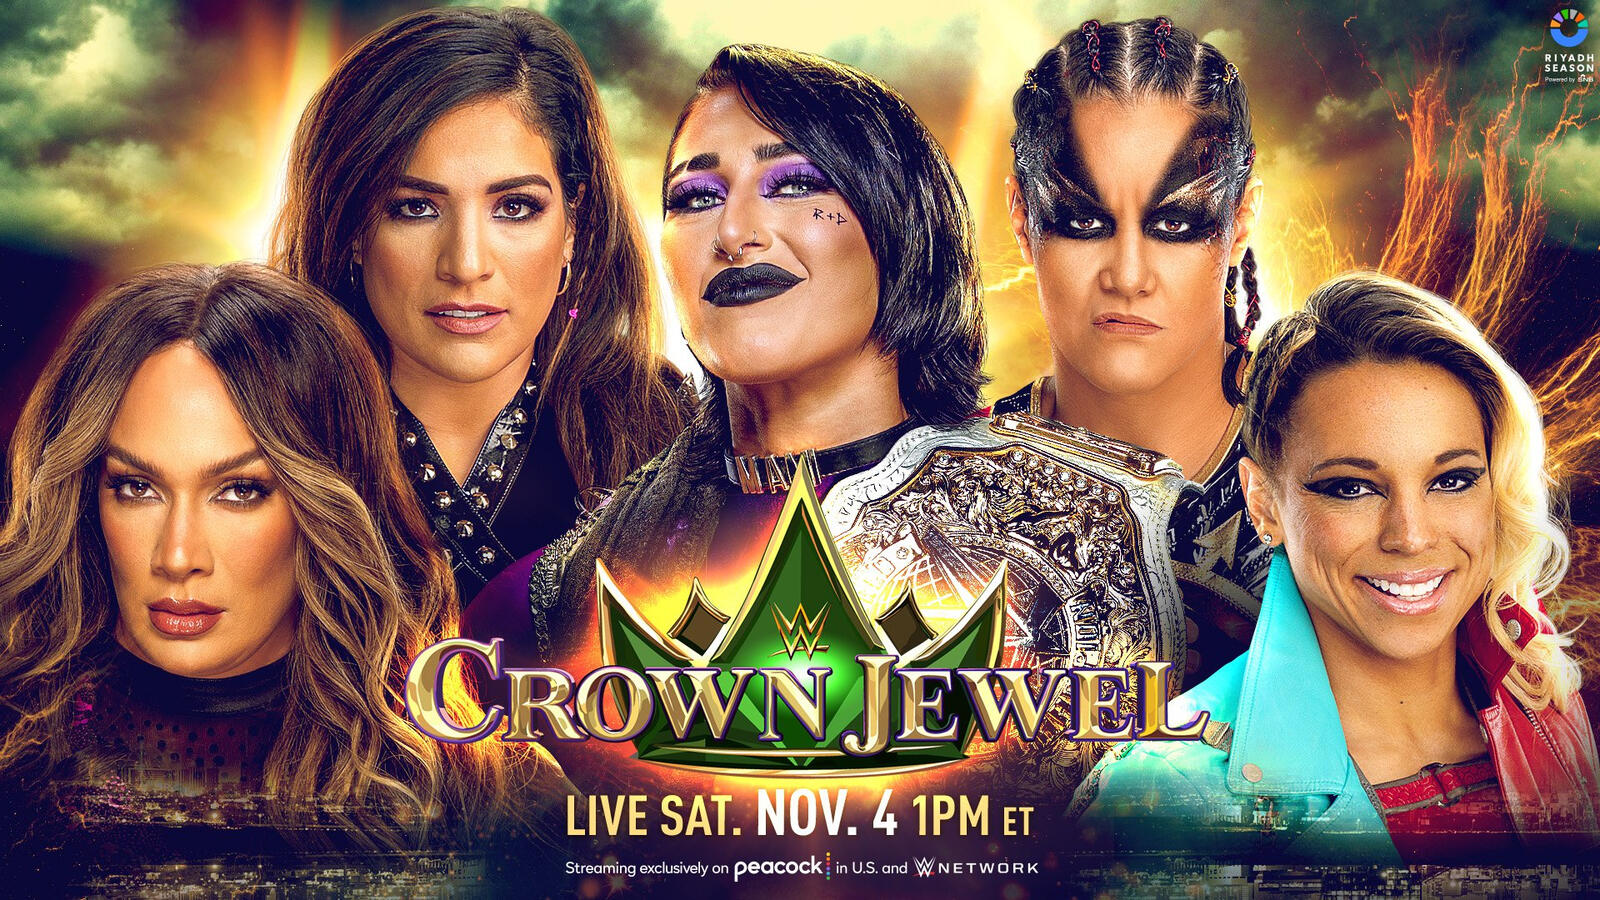 Big Fatal 5-Way Match for the WWE Women's World Championship set for Crown Jewel